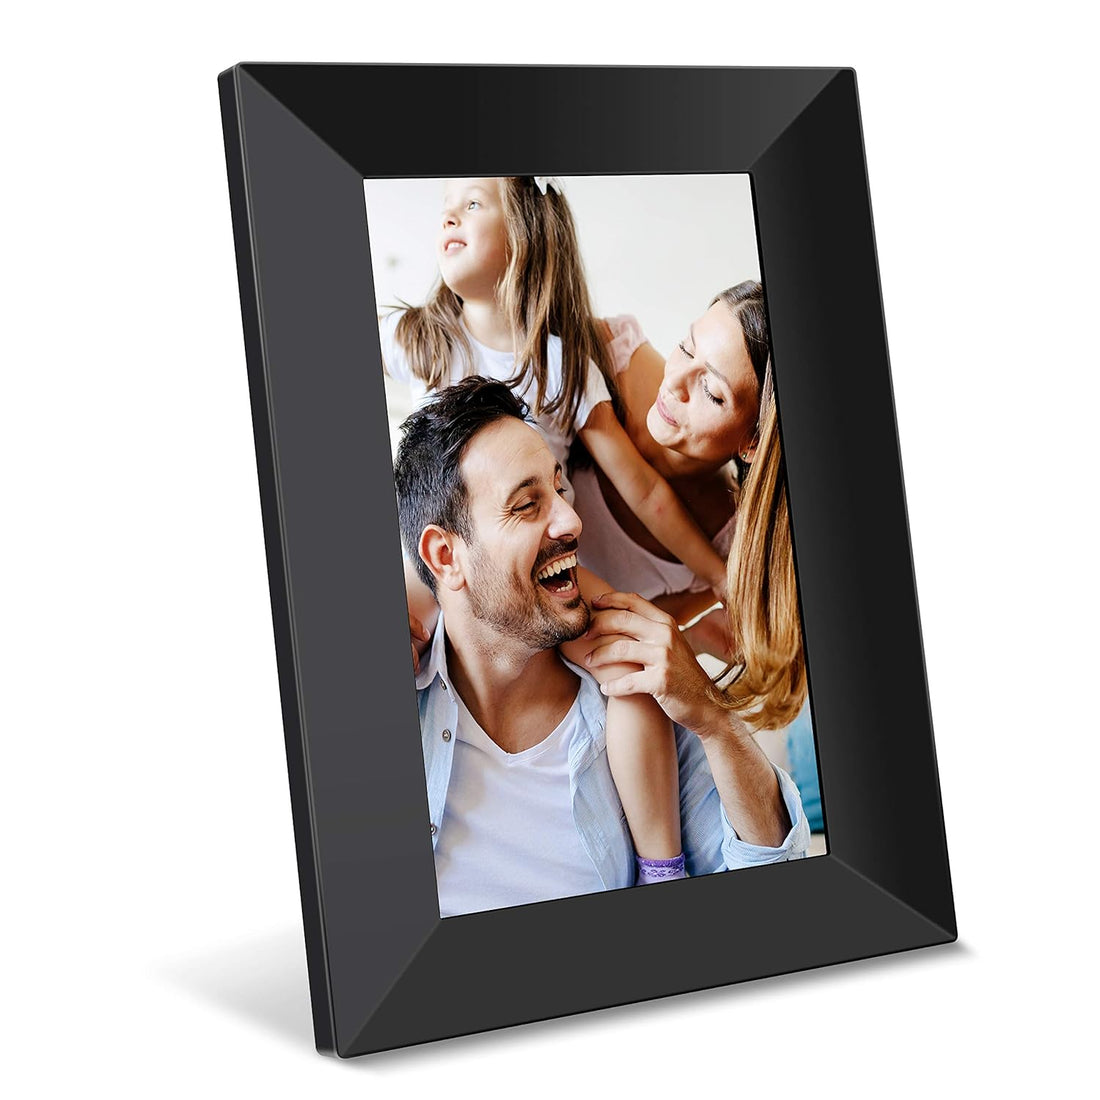 Feelcare Digital WiFi Picture Frame 8 inch, Send Photos or Videos from Anywhere, 16GB Storage,1280x800 IPS HD Display,Touchscreen for Easy Navigation